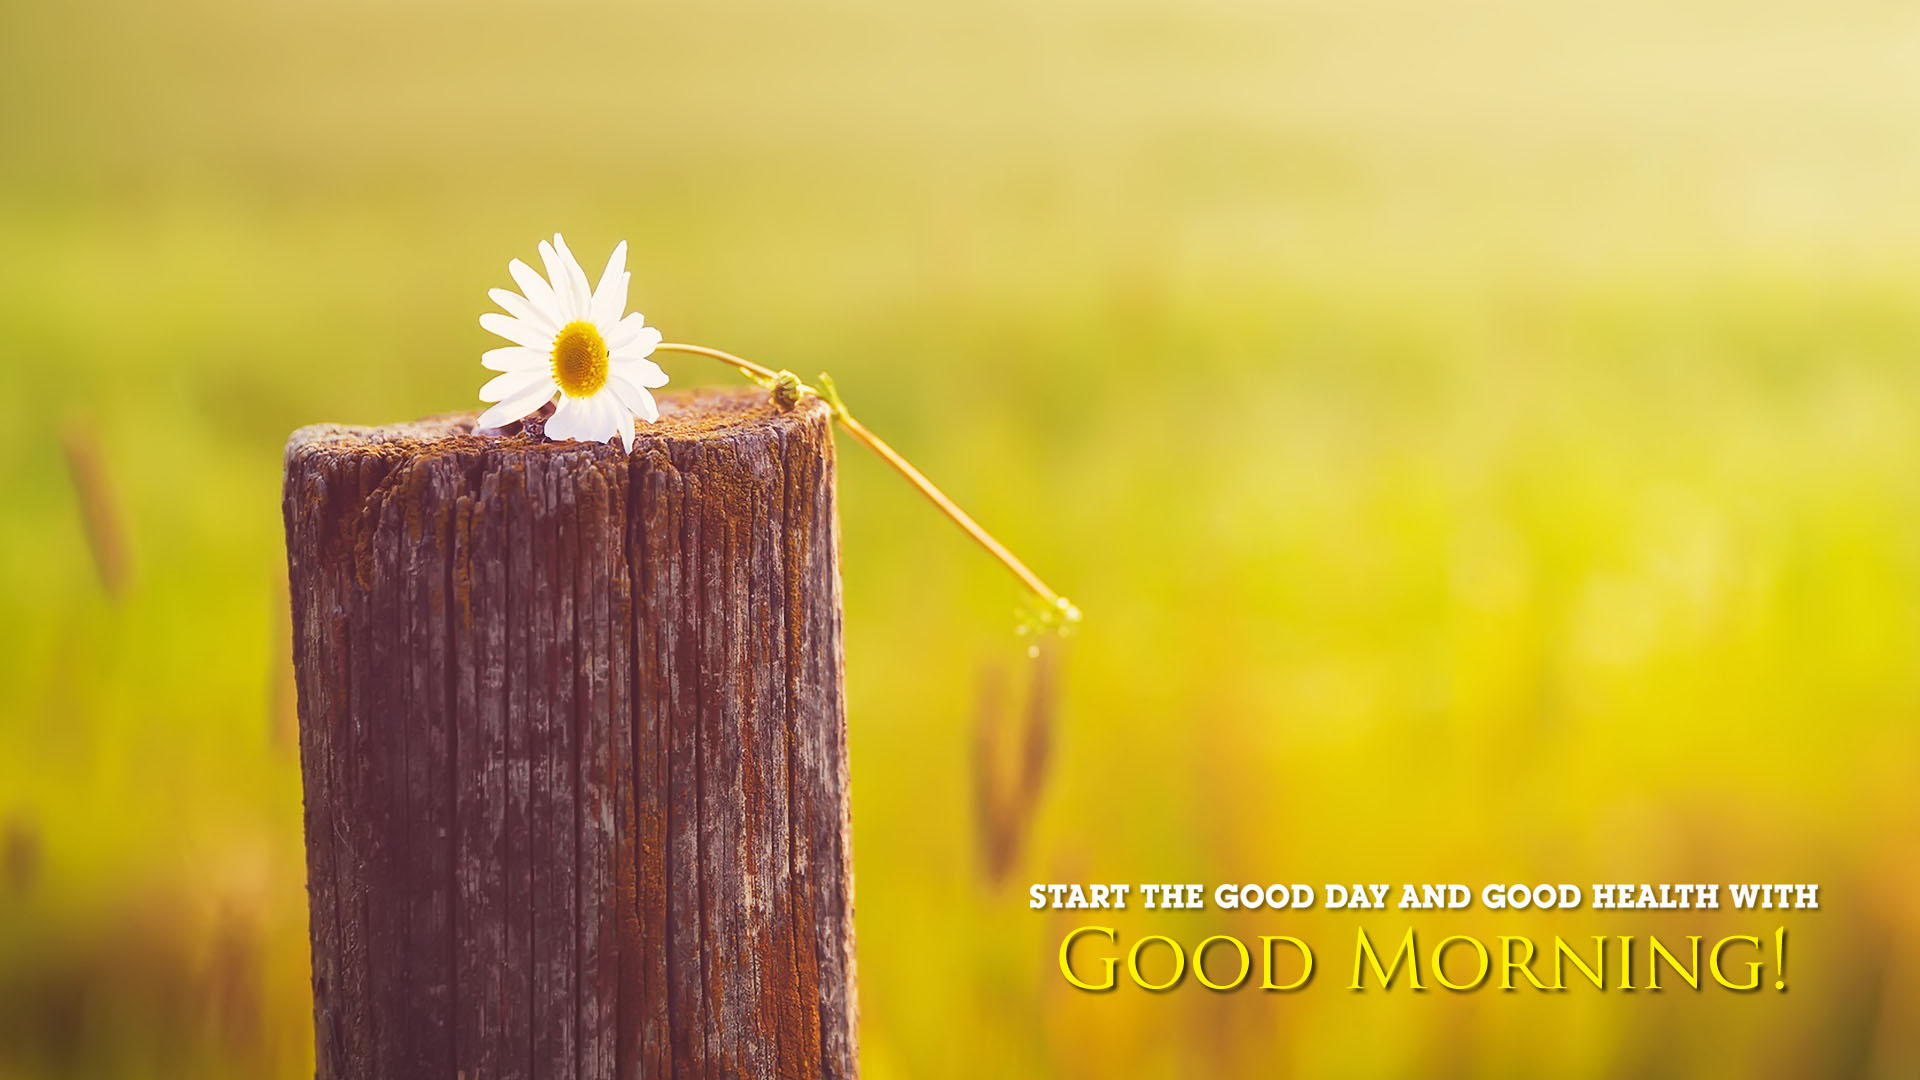 Good Morning Best Wallpapers And Backgrounds - Good Morning Hd Background -  1920x1080 Wallpaper 